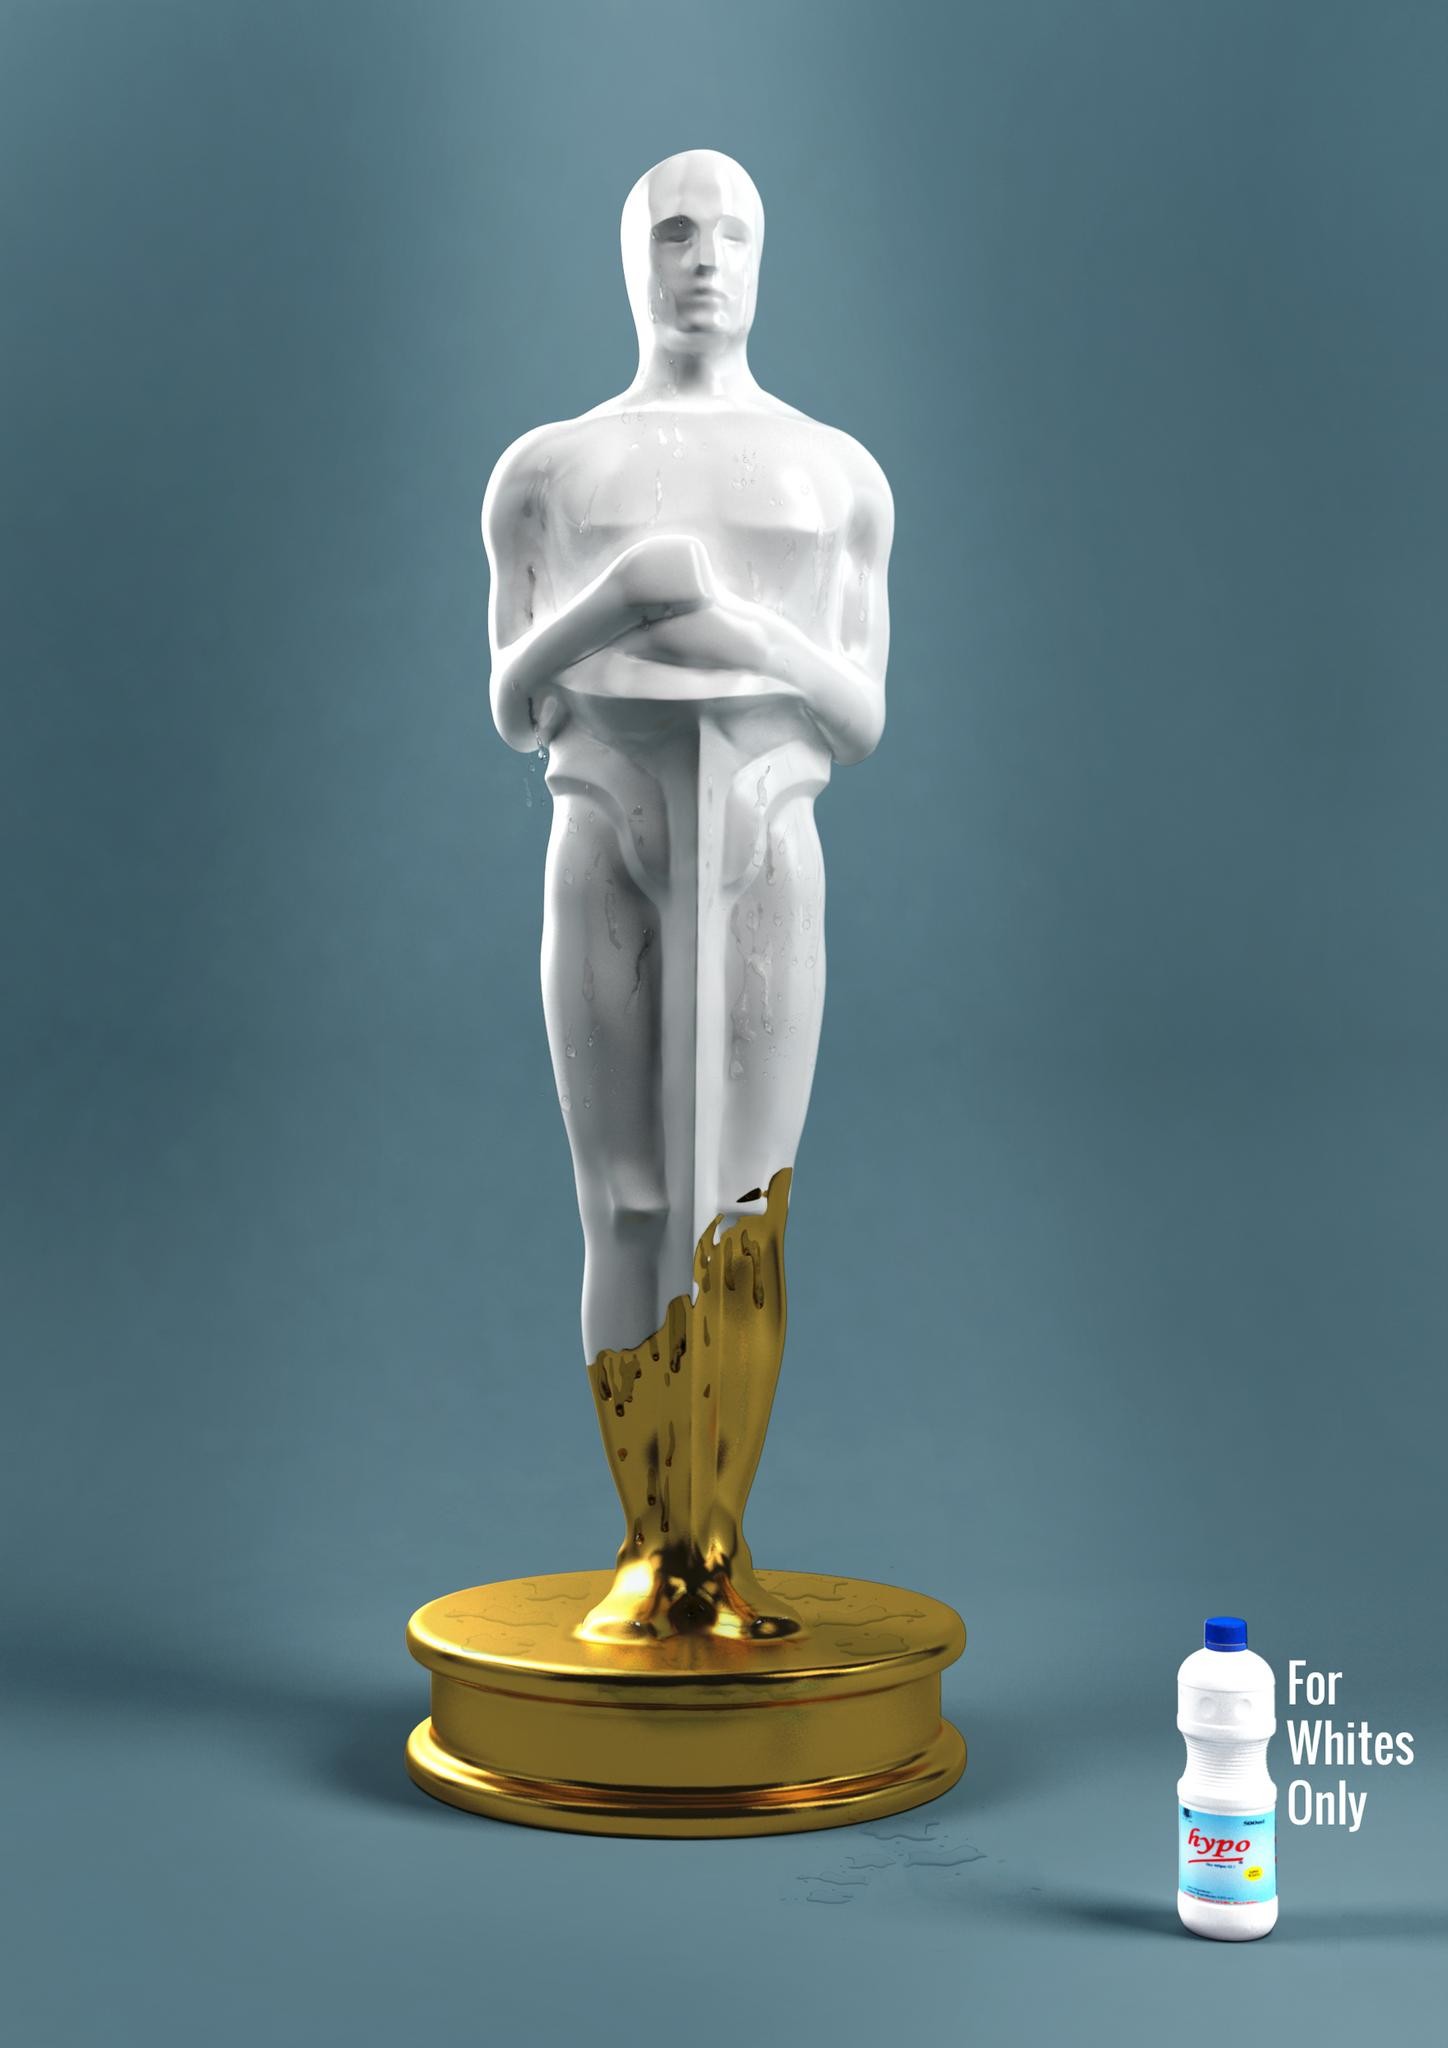 For Whites Only (Oscars)